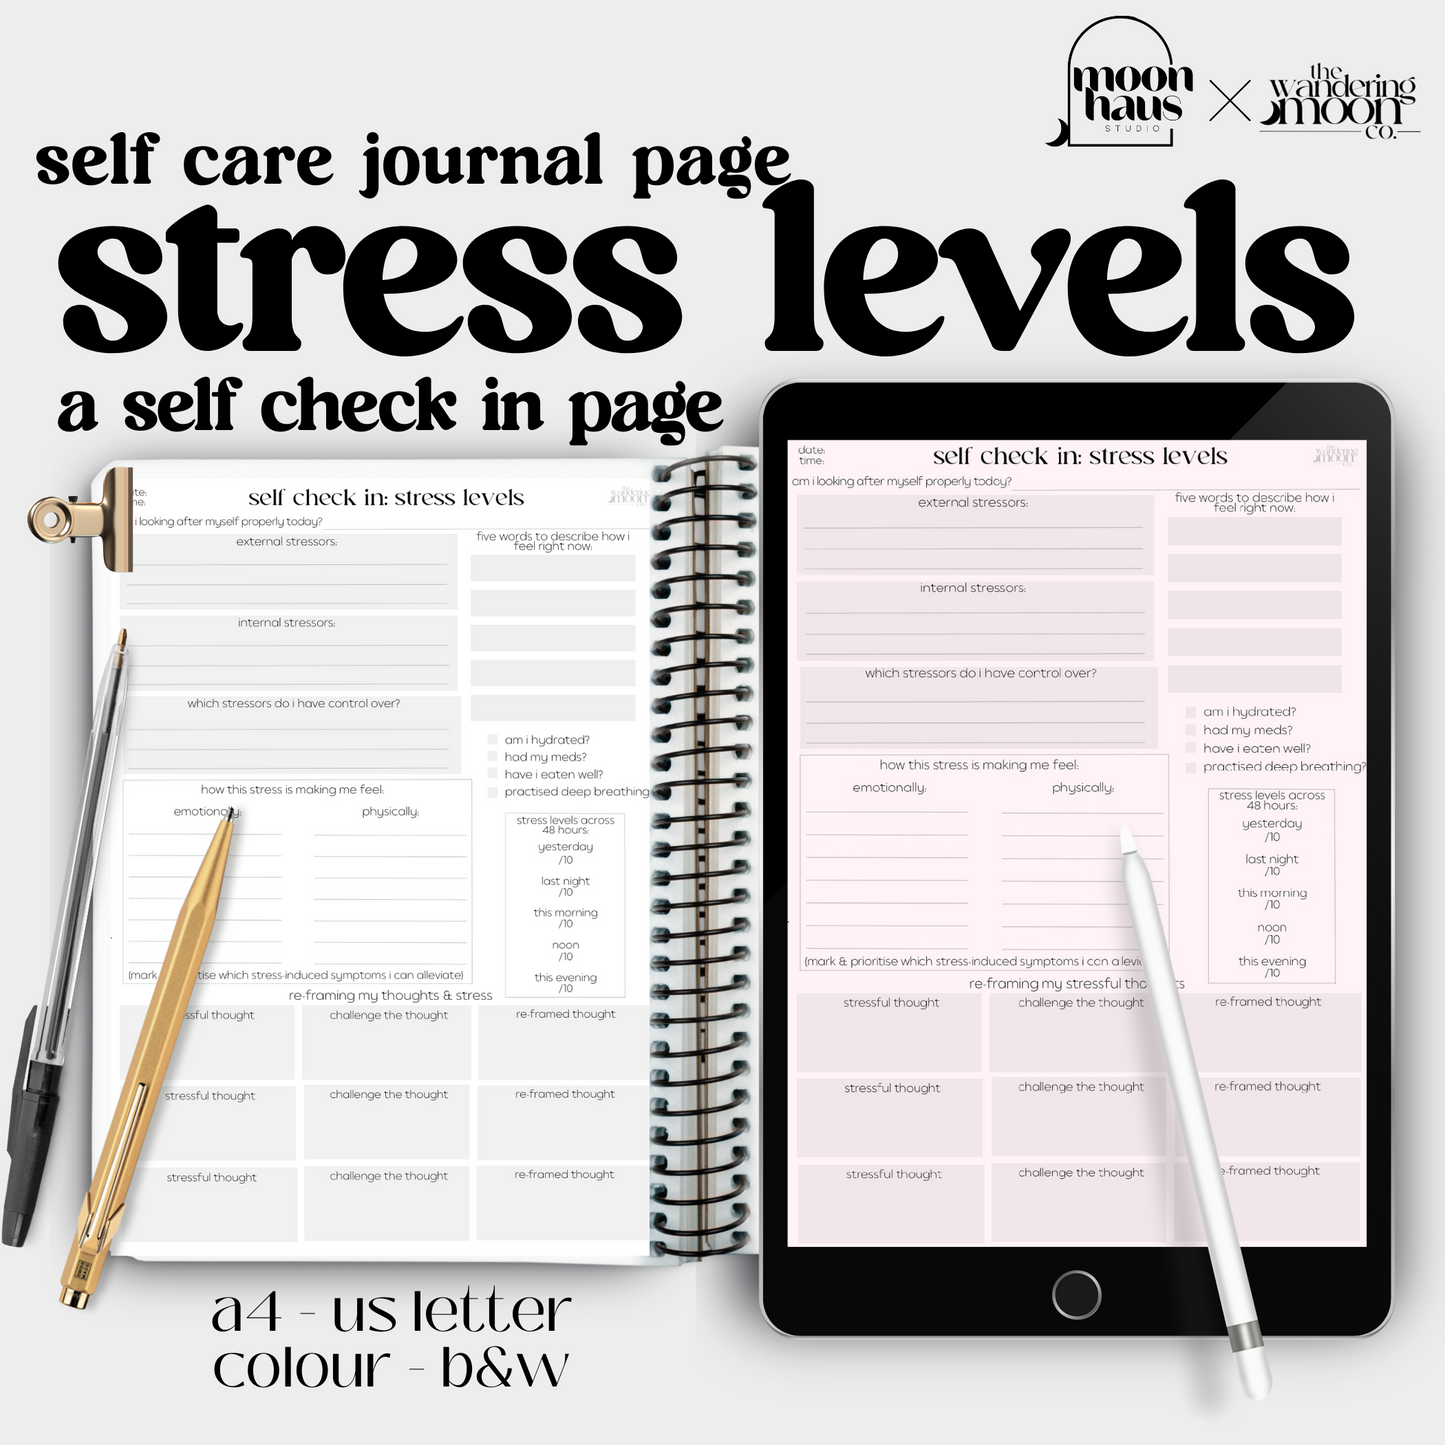 stress levels & chronic pain/illness: a self check in journal page